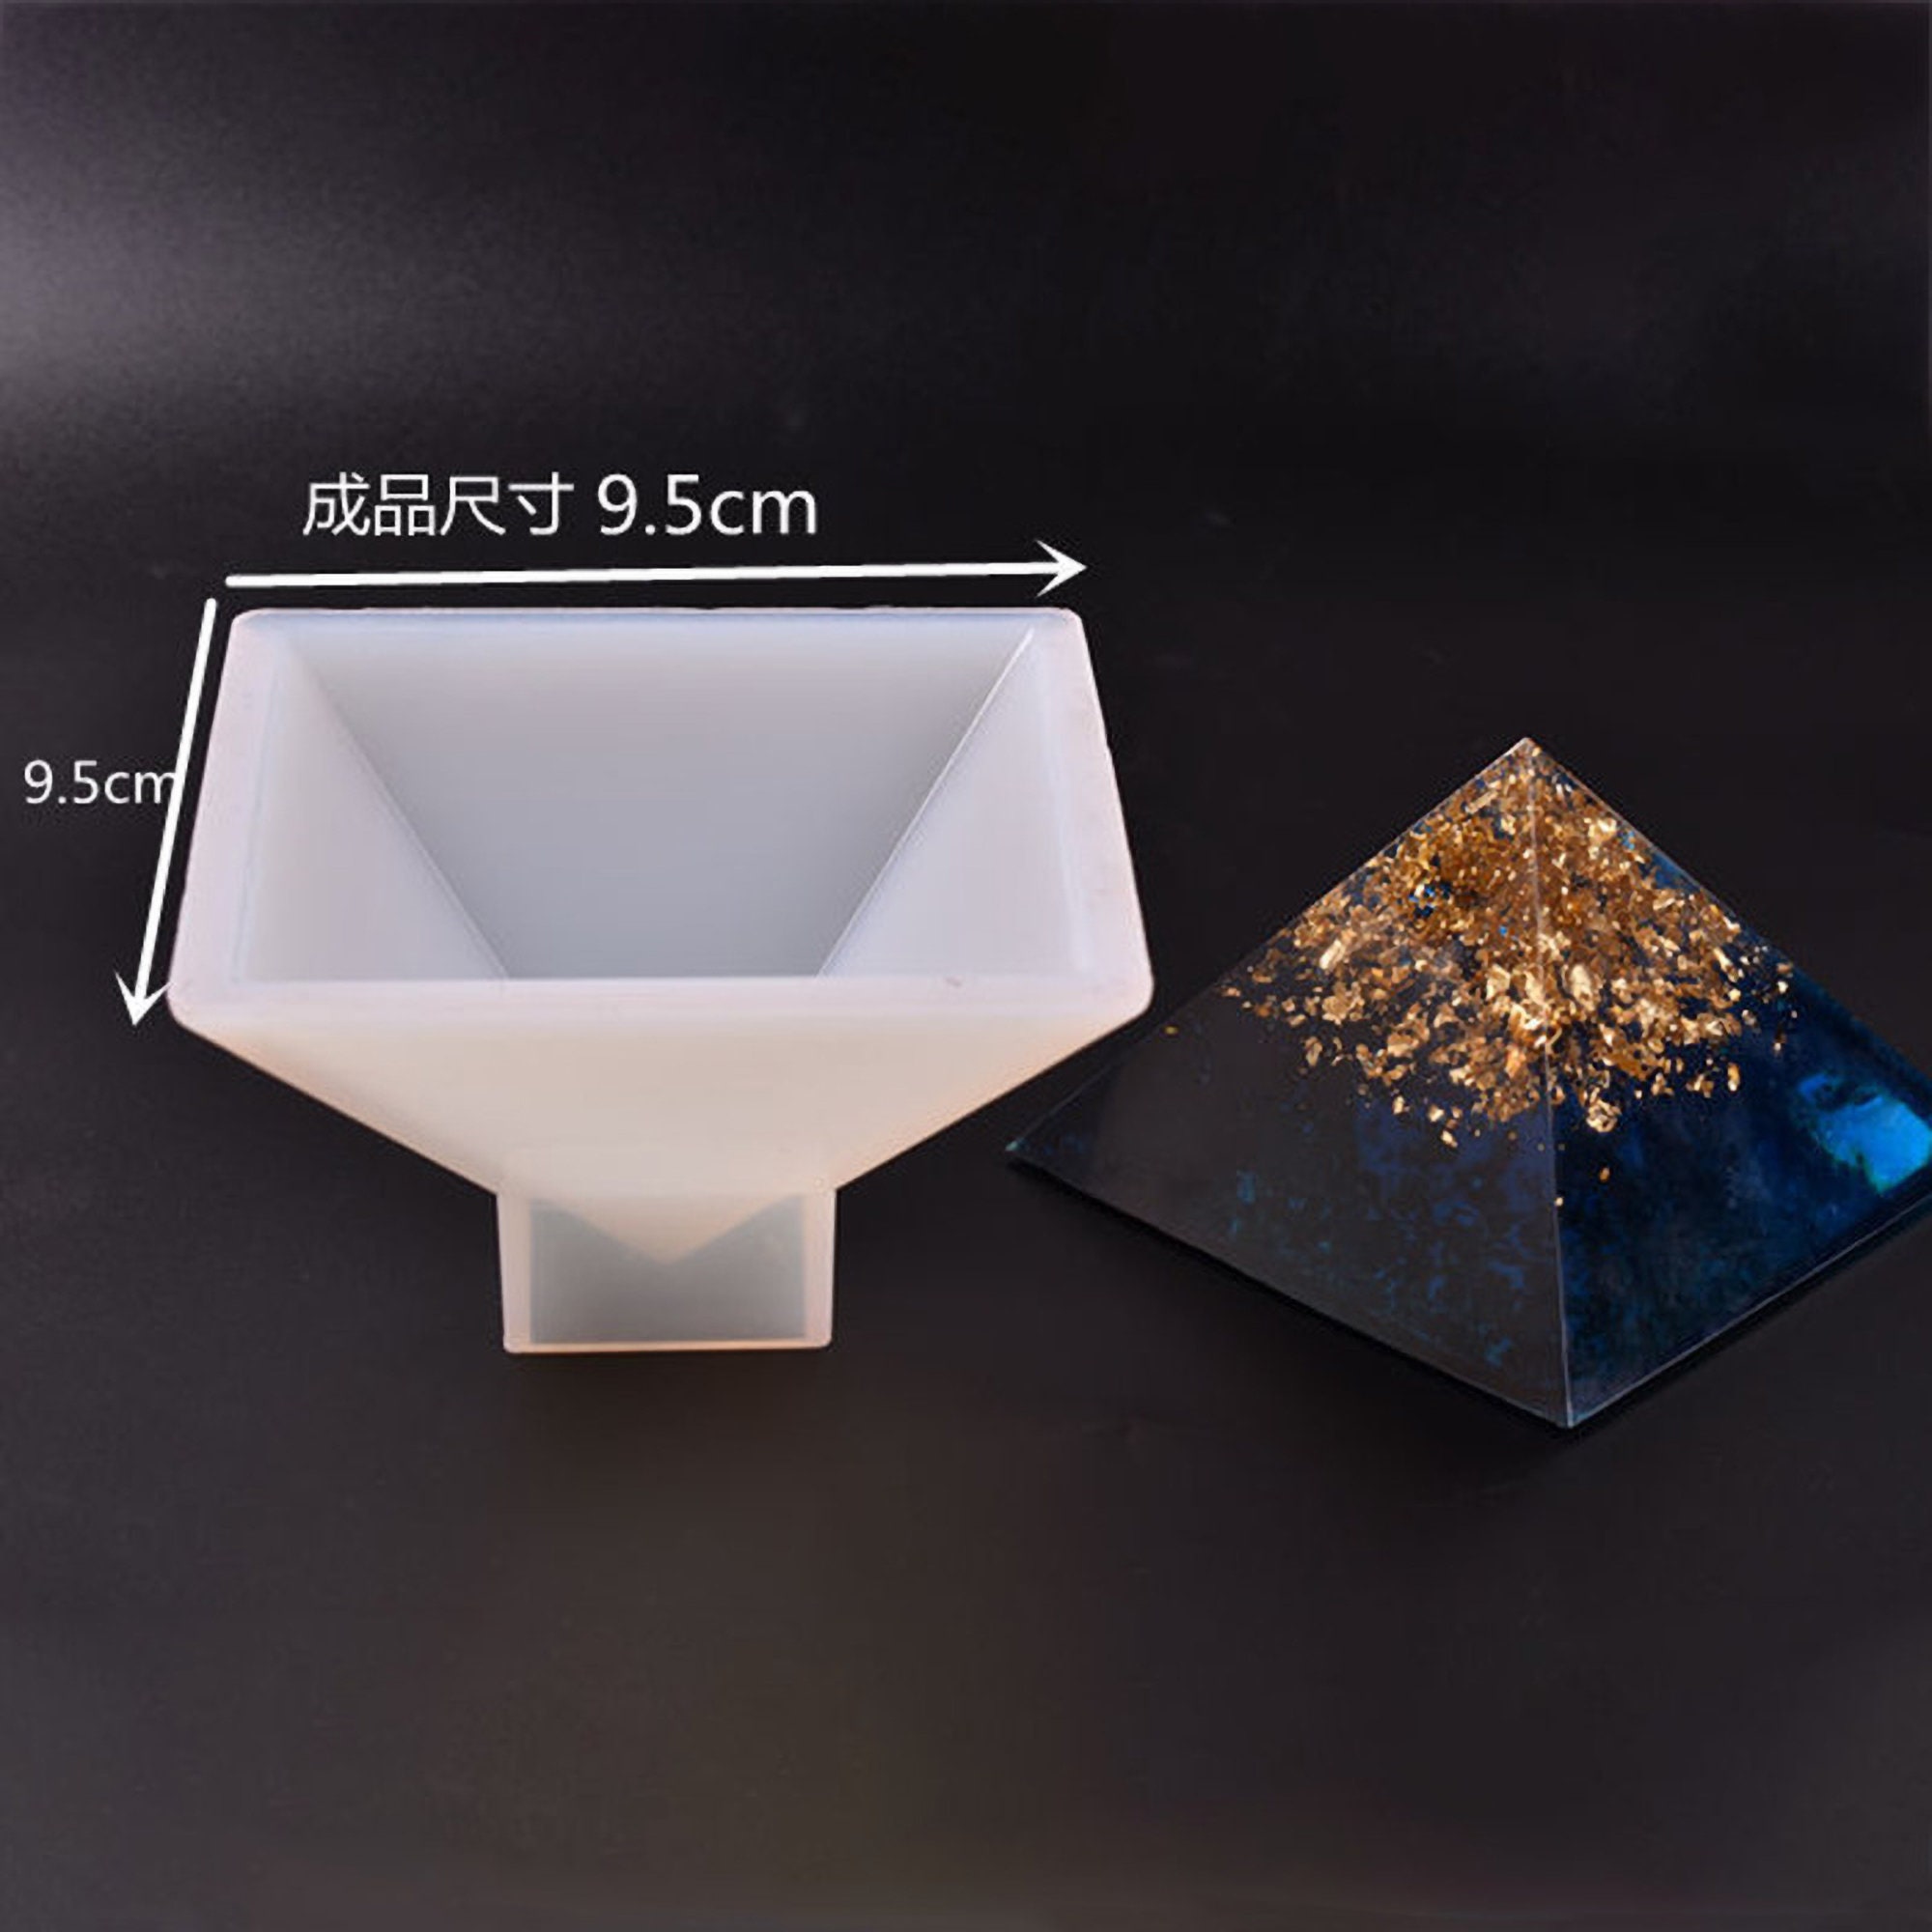 Super Large Pyramid Resin Silicone Mold Resin Casting Jewelry